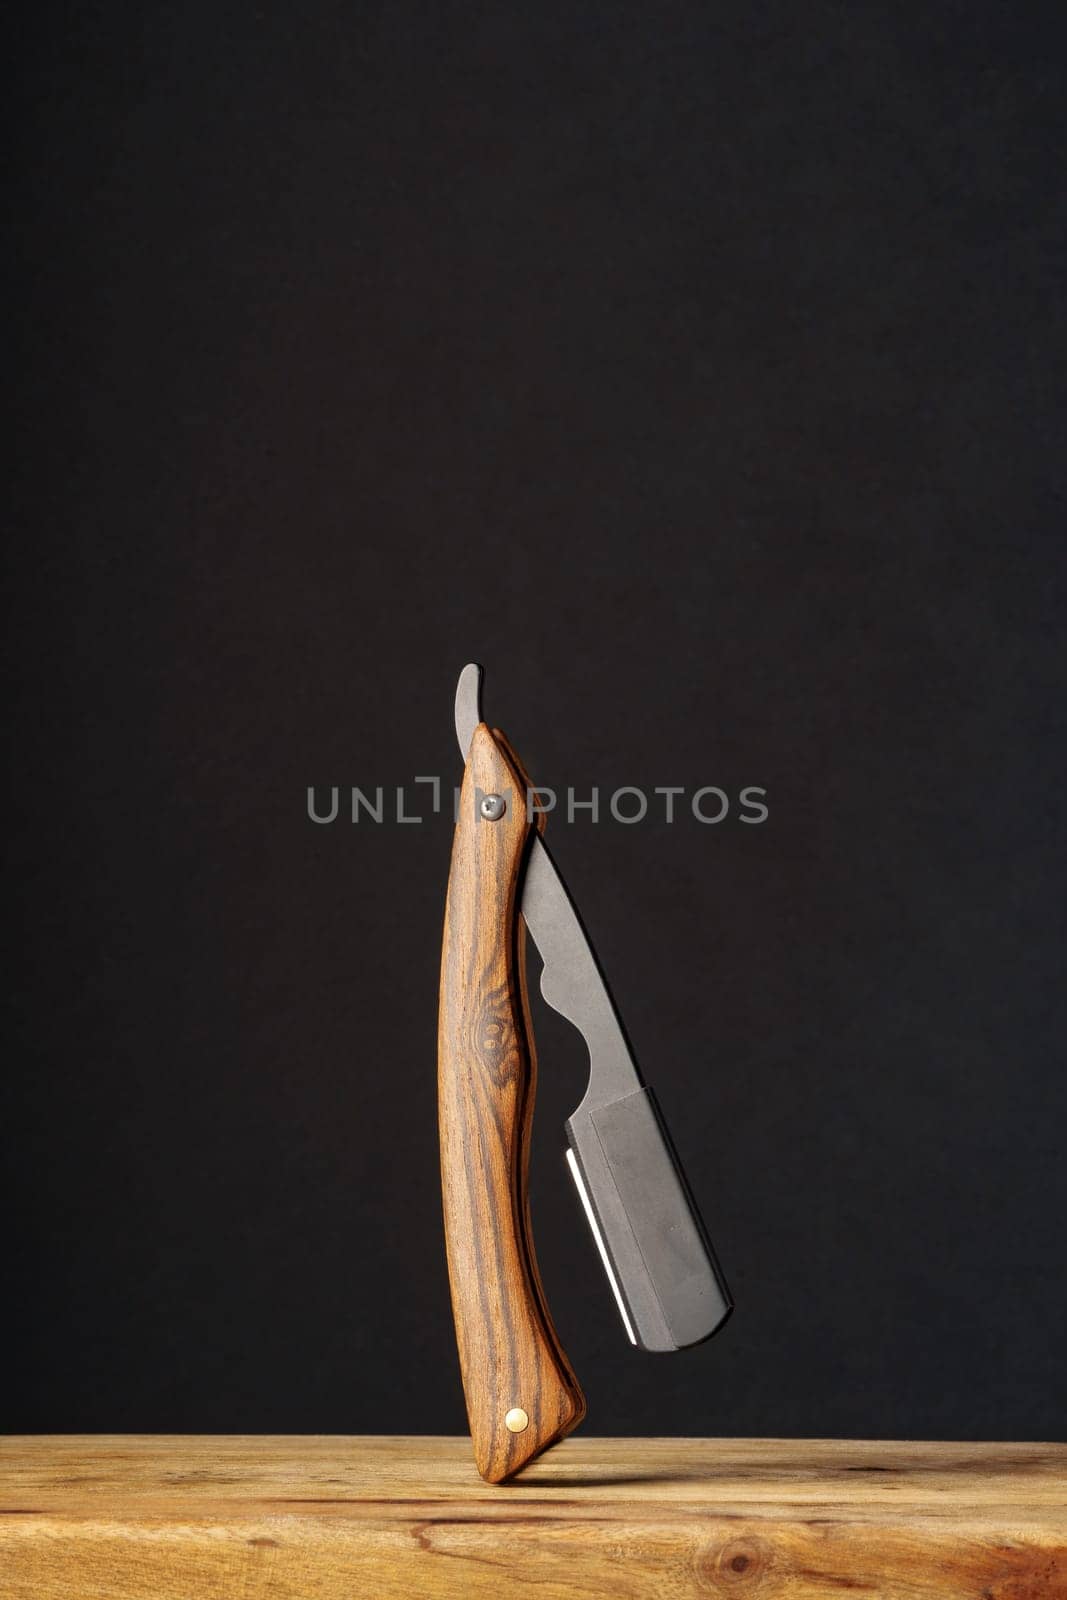 A sleek folding knife with a wooden handle is showcased in an upright position on a rustic wooden platform, presenting a contrast against the stark, dark backdrop.